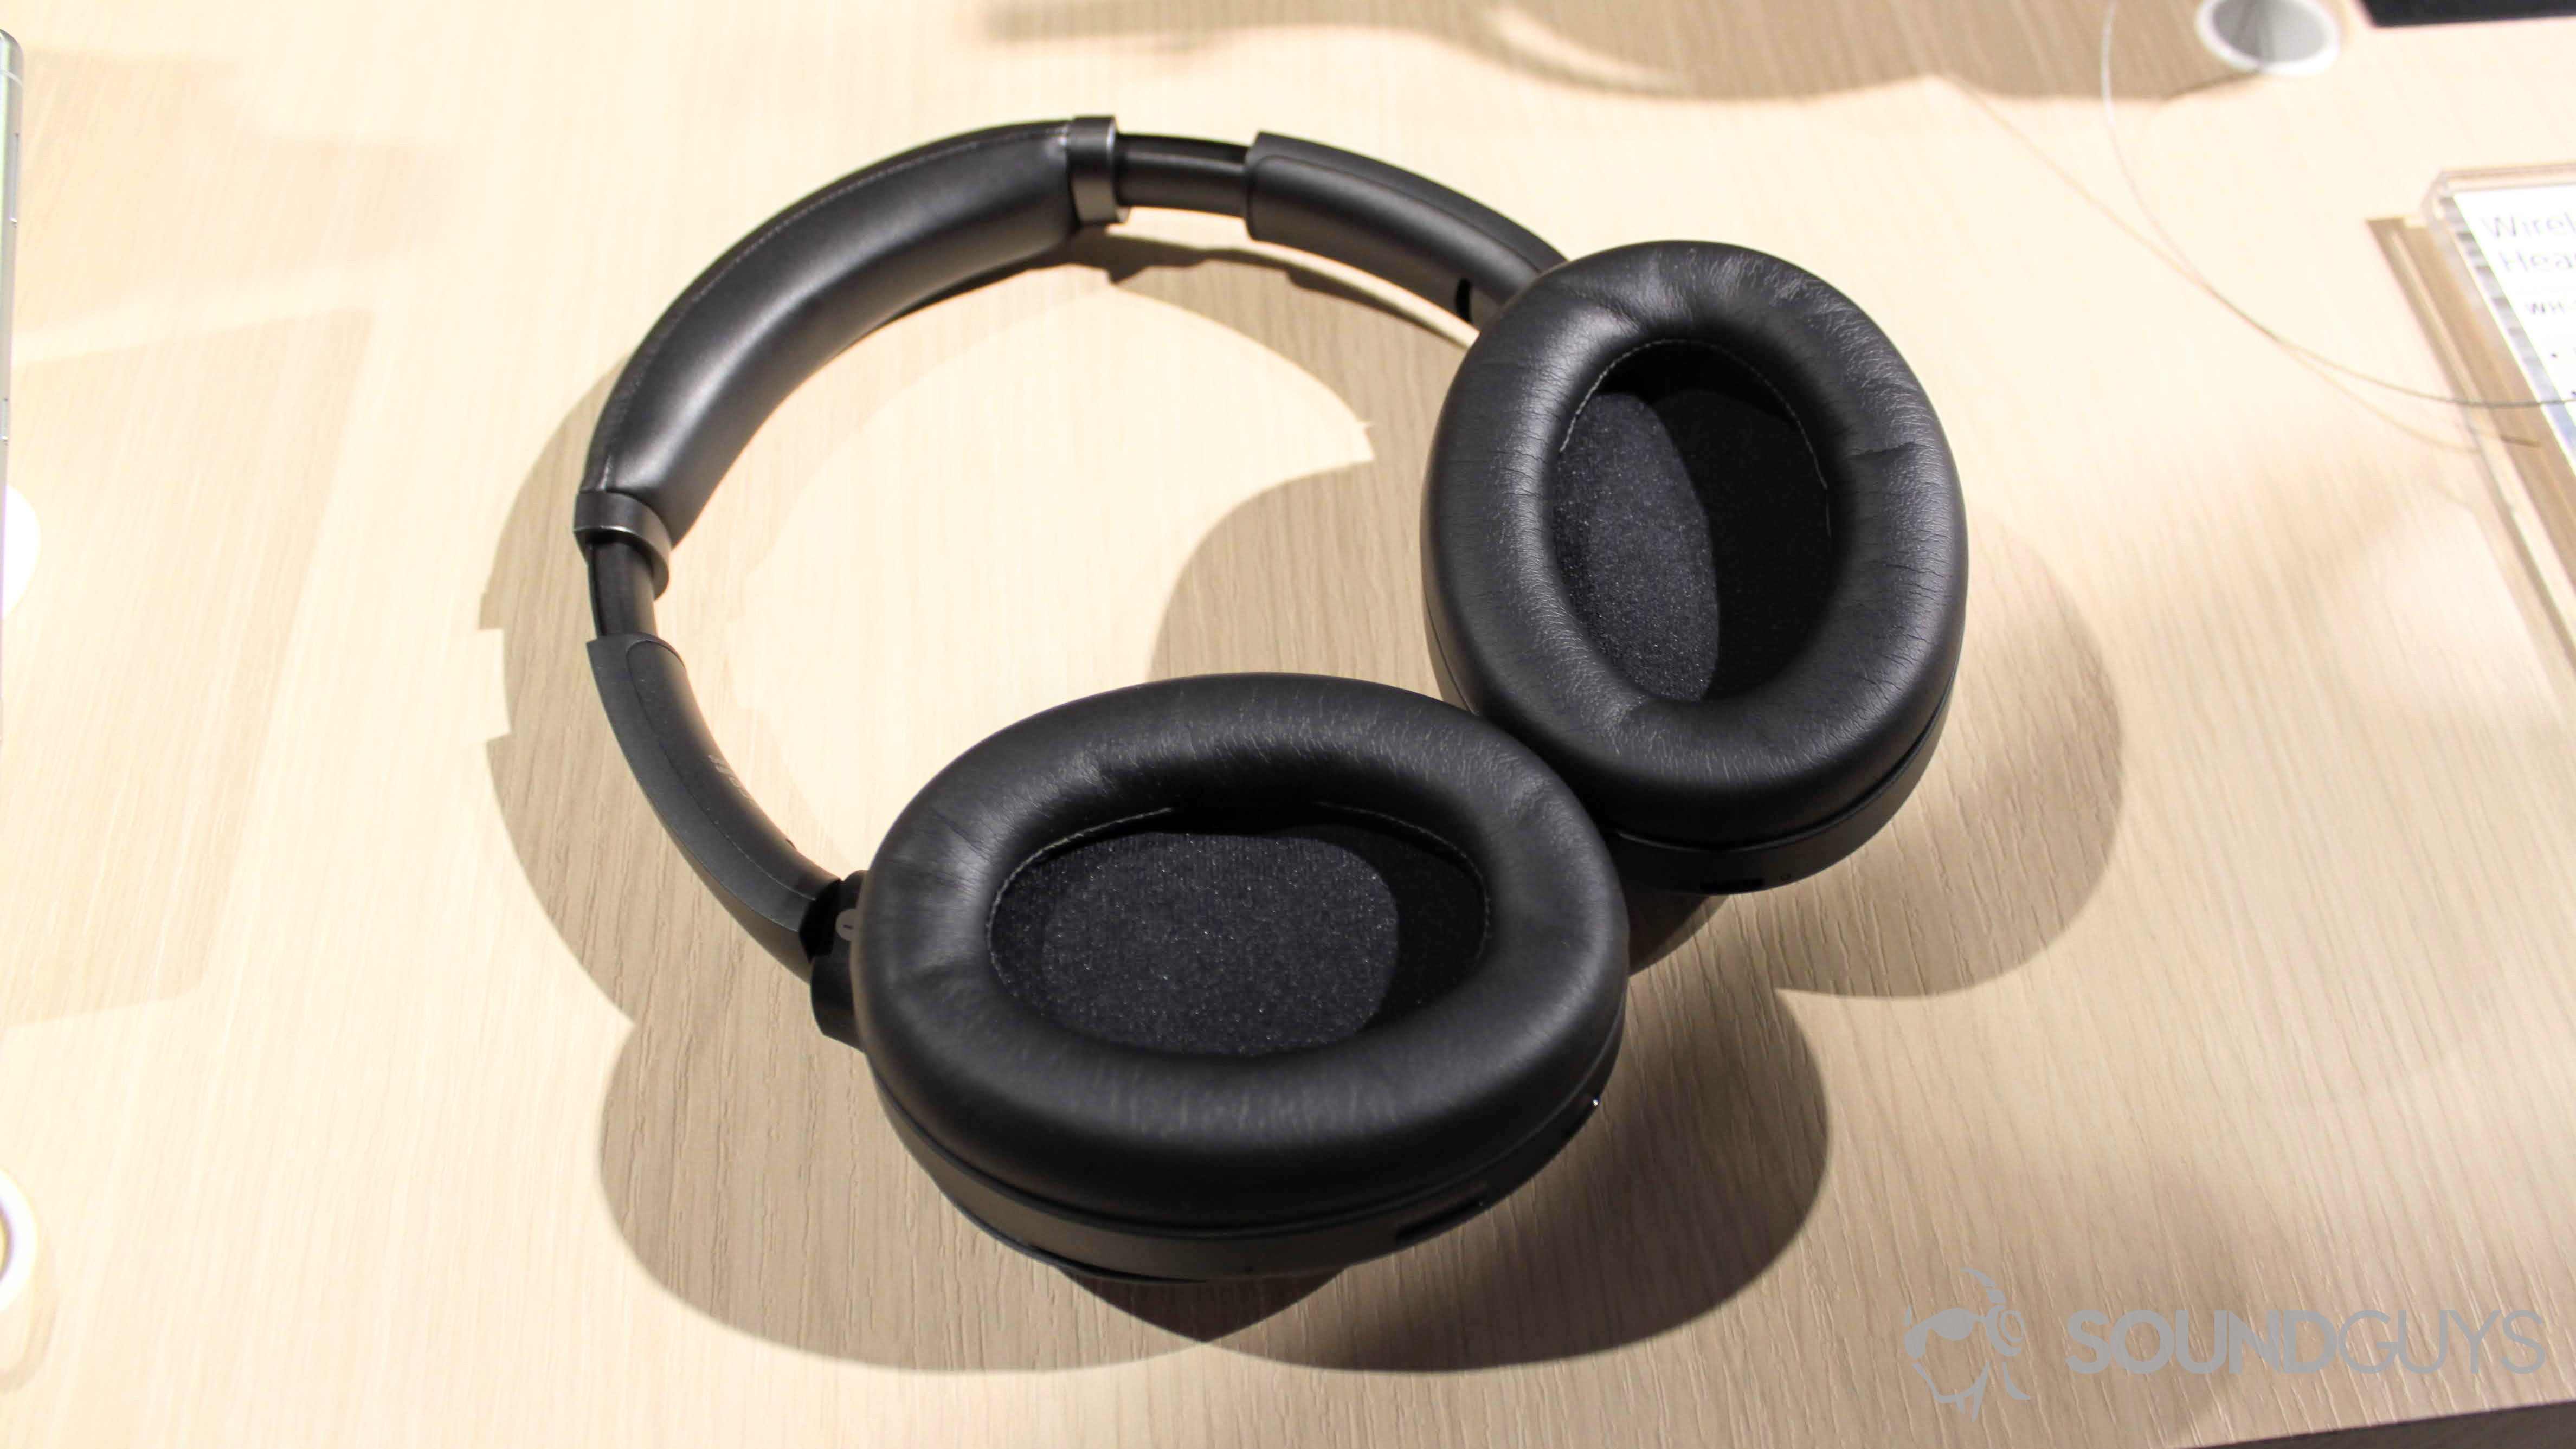 Sony WH-1000XM3 headphones with earpads facing up on a table.